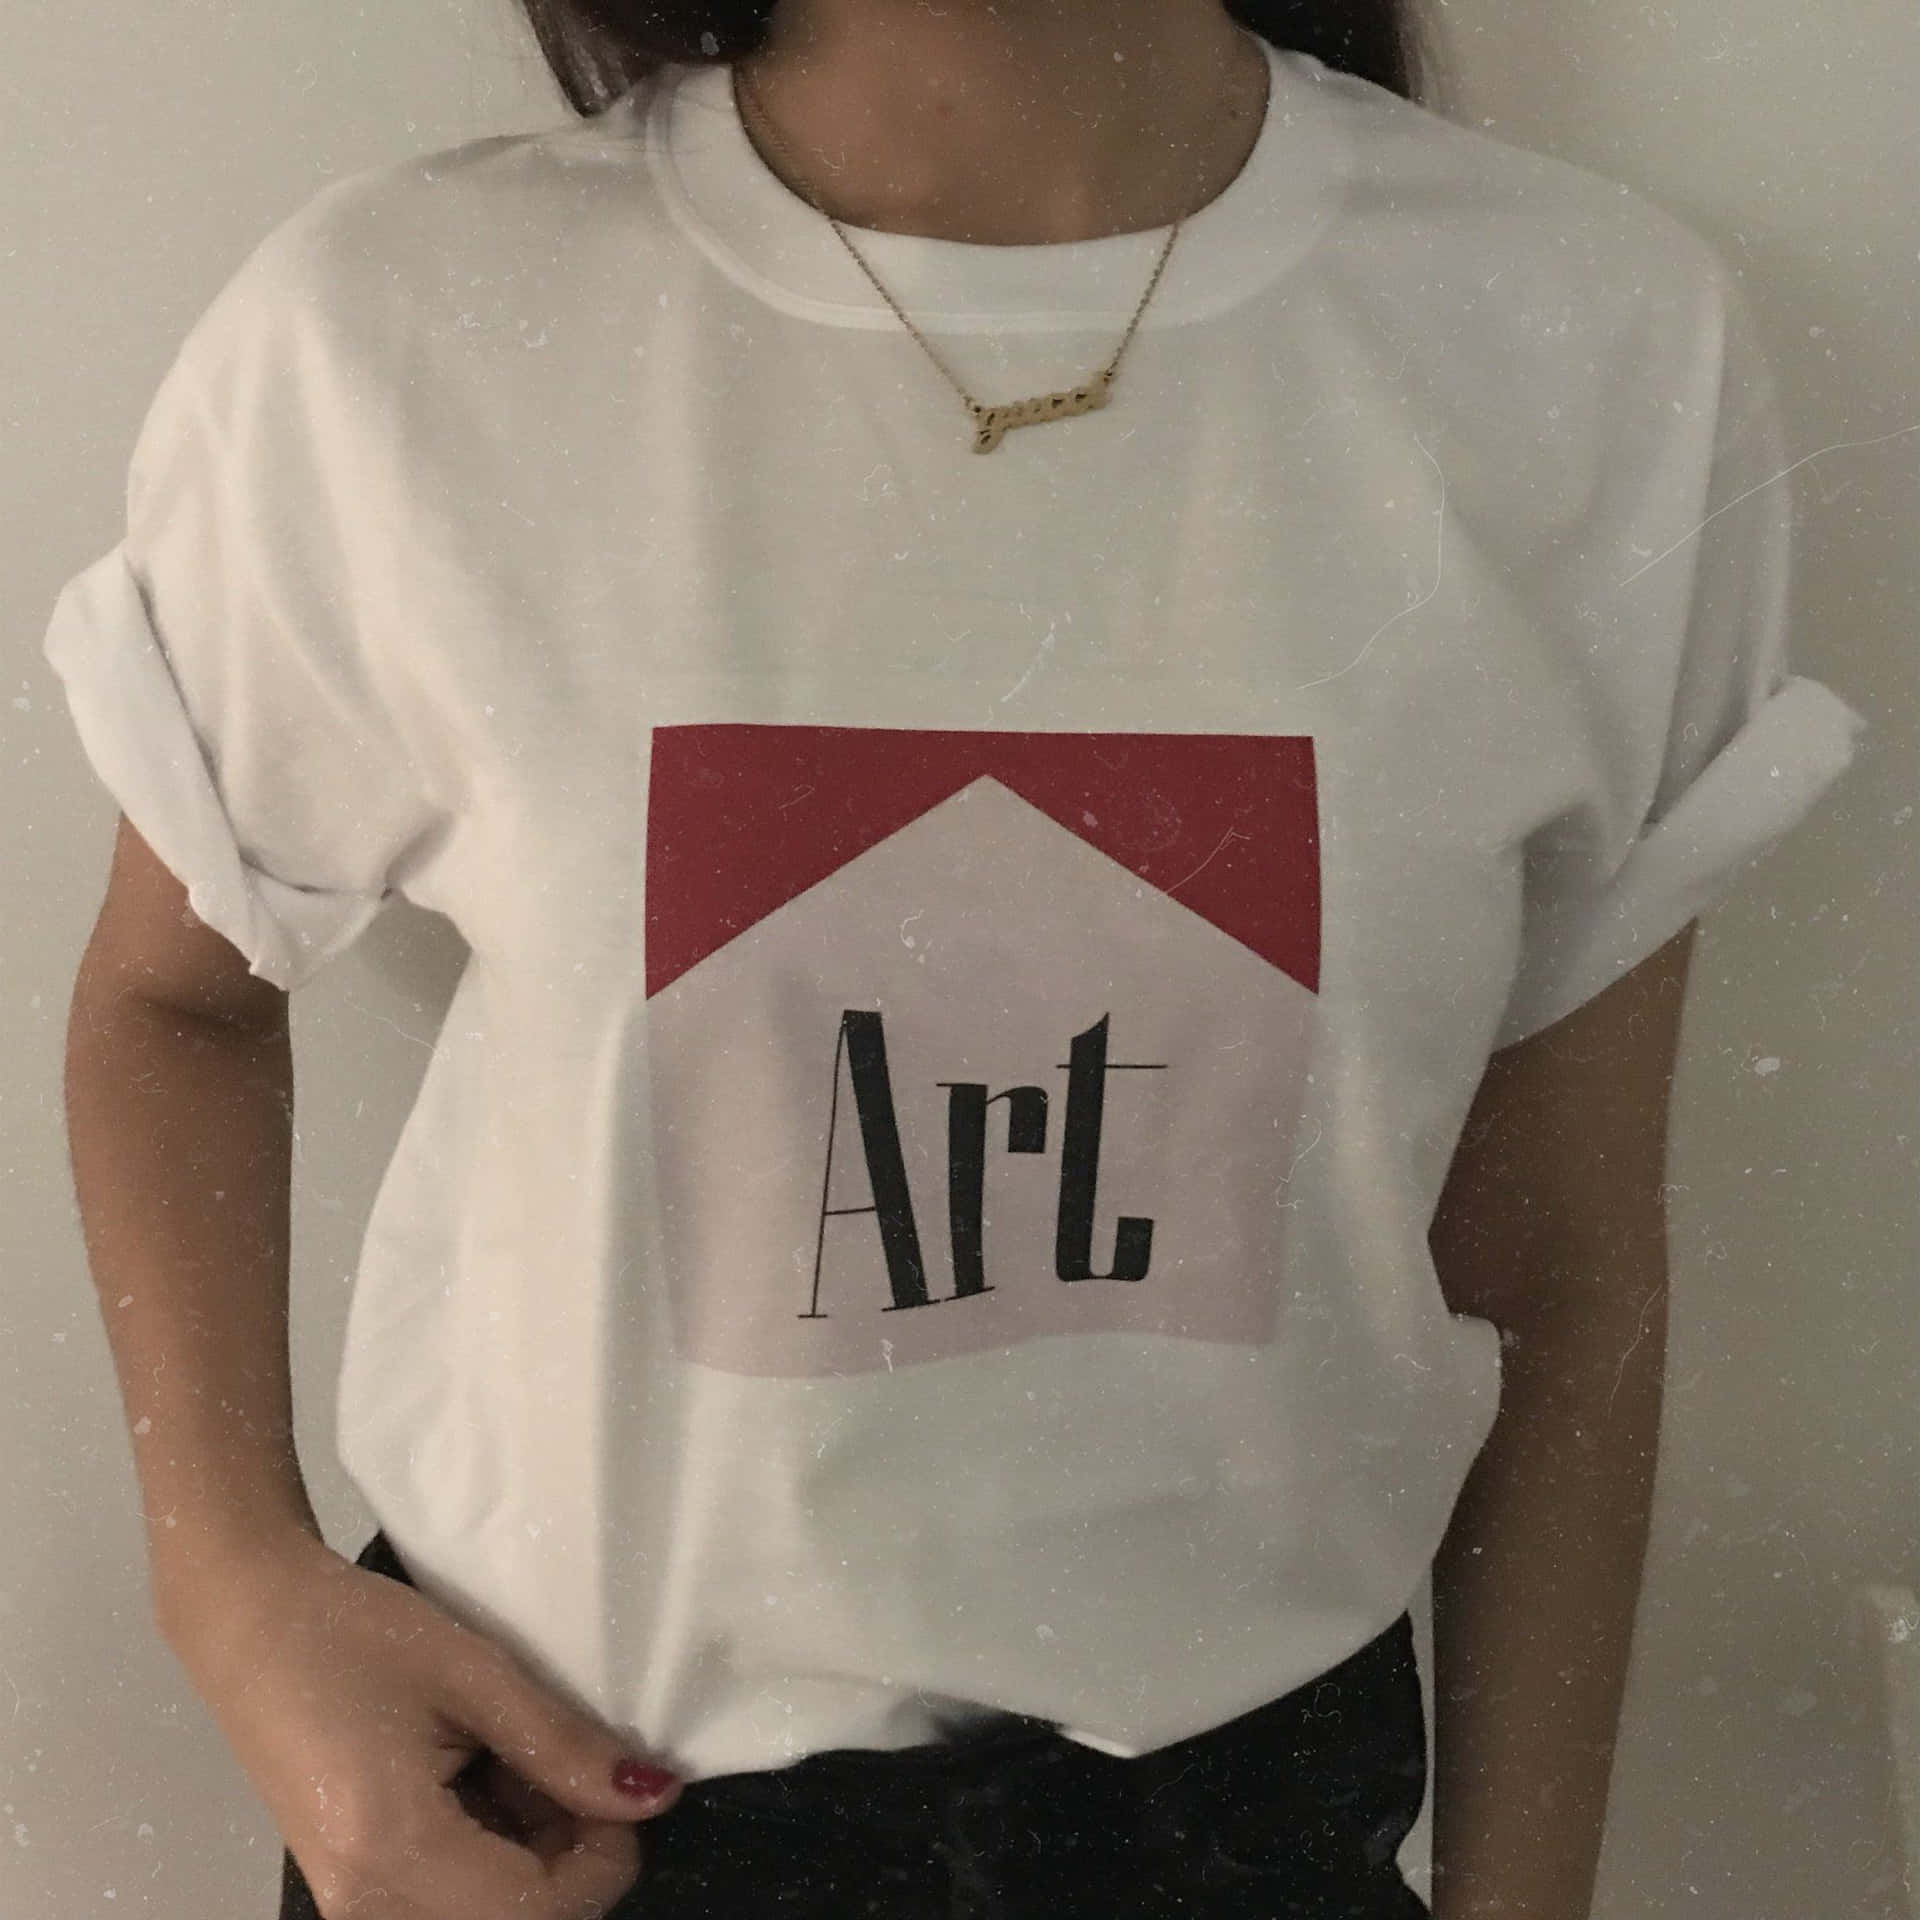 A Woman Wearing A White T - Shirt With The Word Art On It